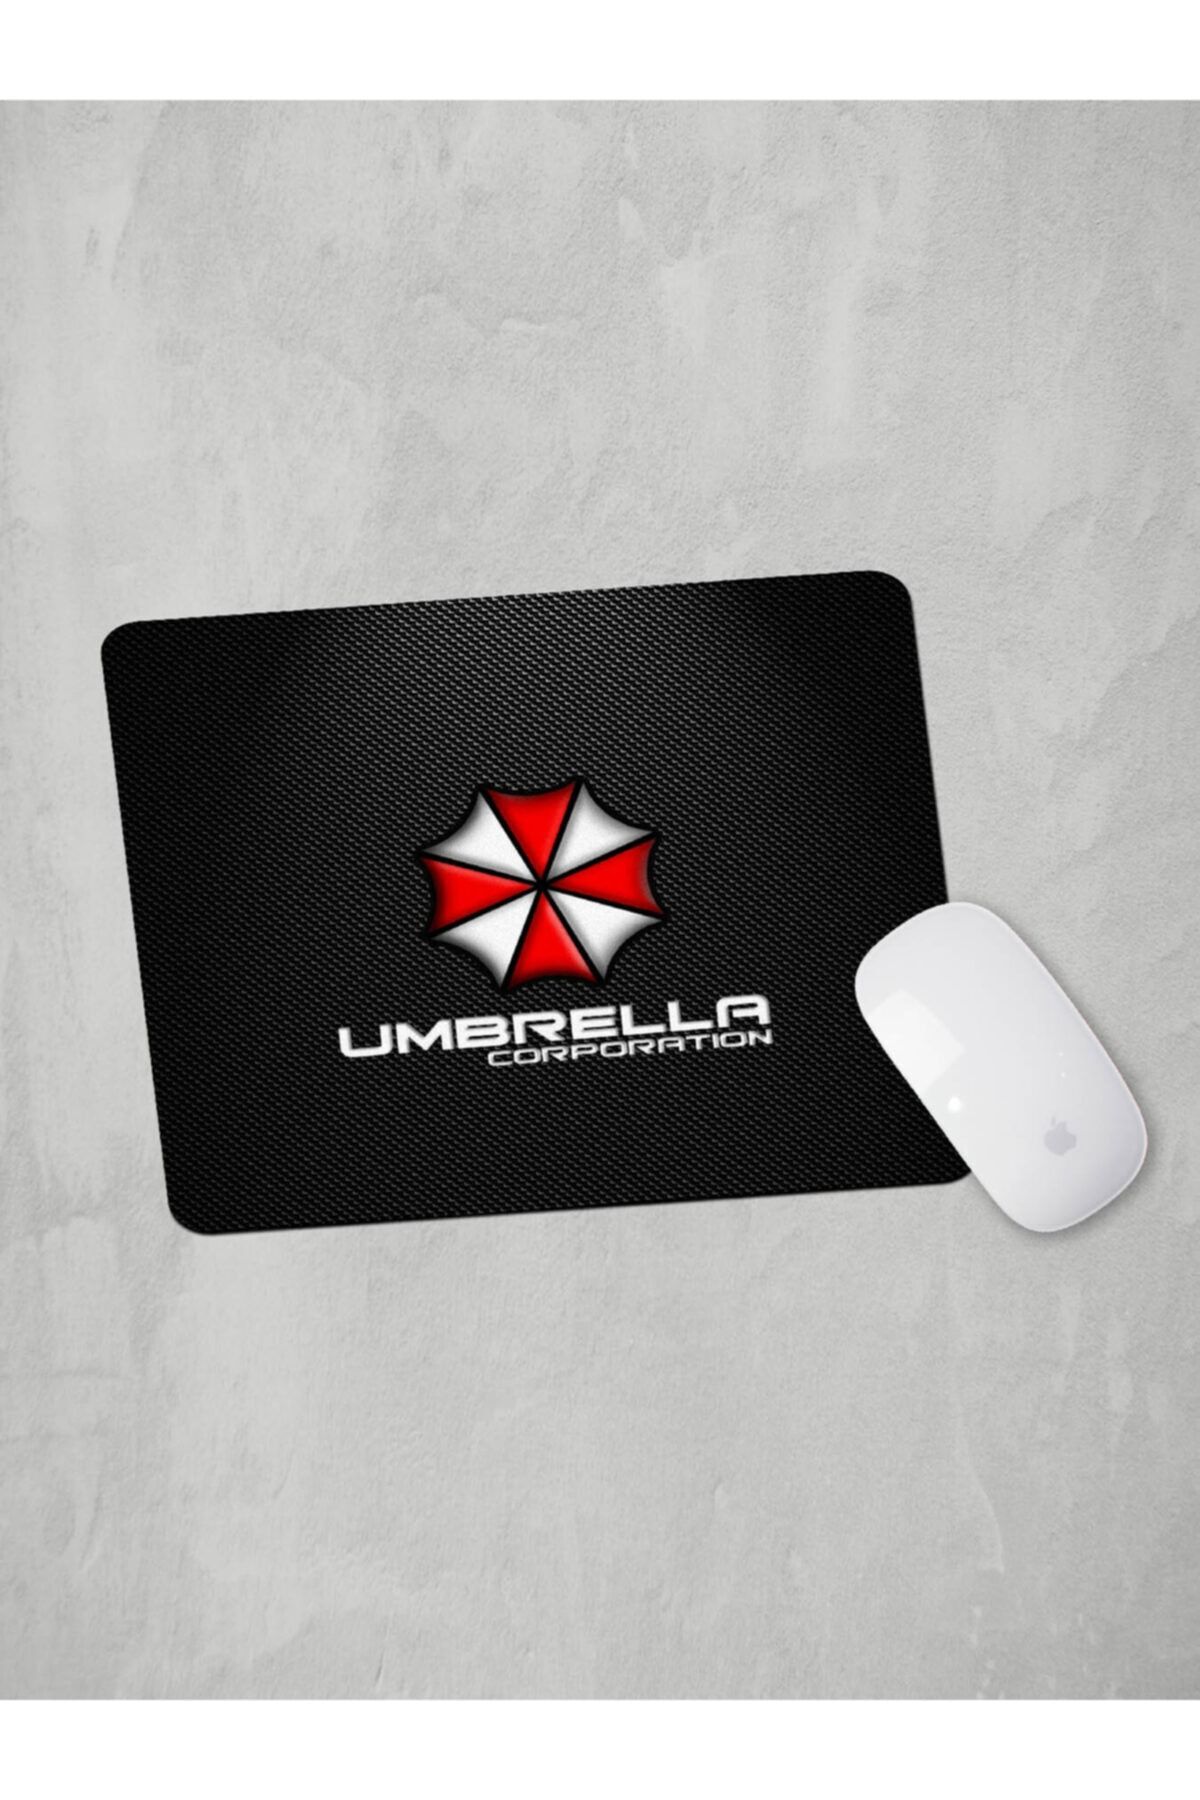 What would happen if the Umbrella Corporation was a real company